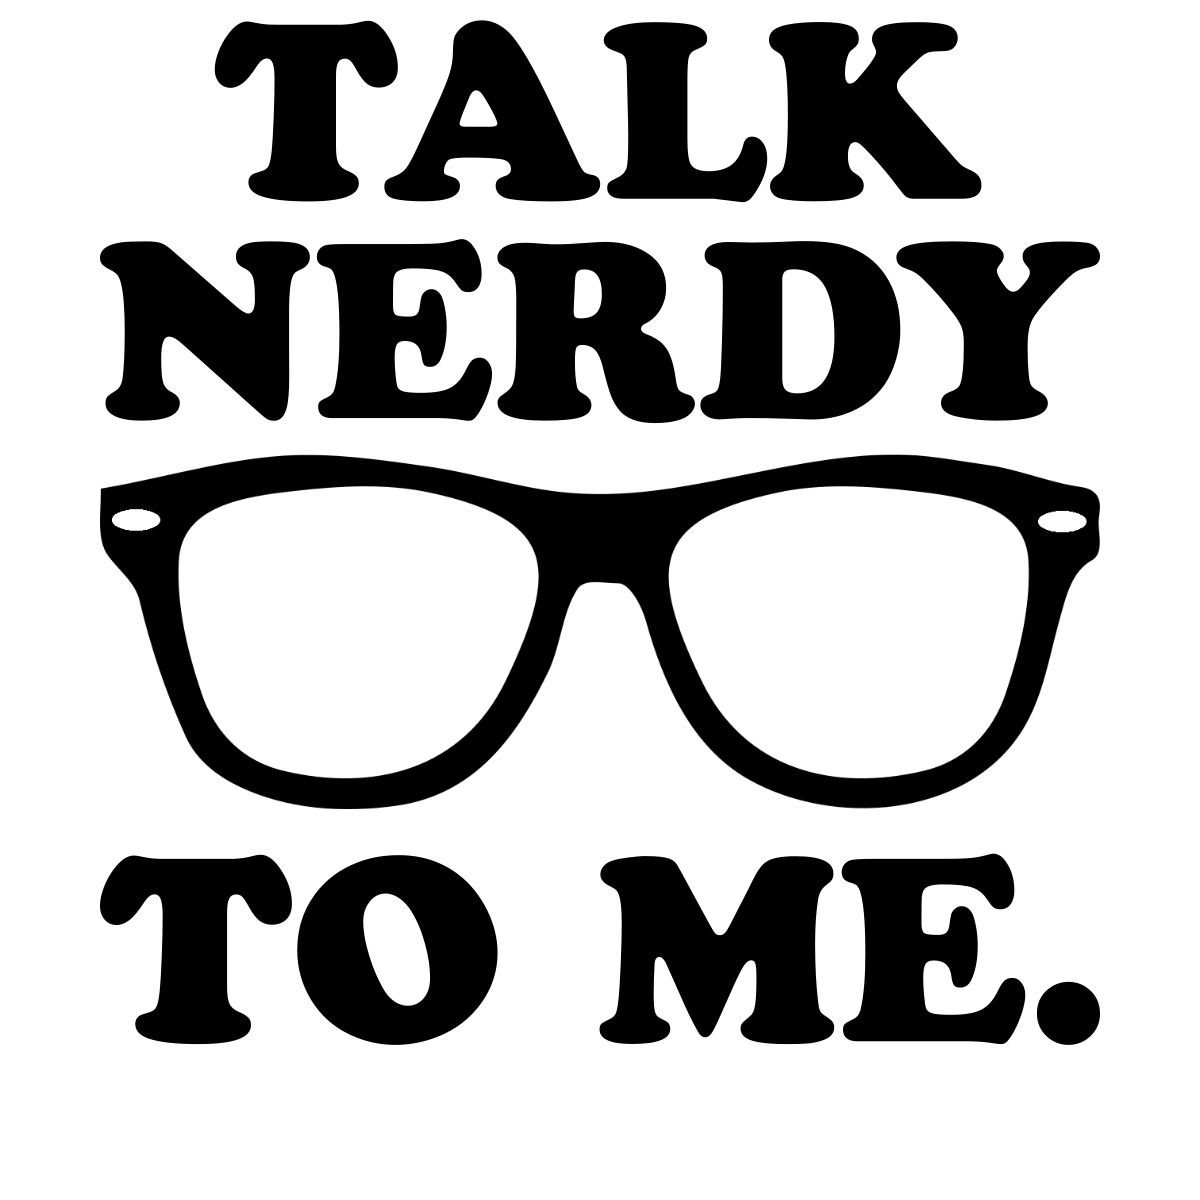 Talk Nerdy To Me - Engineering Outfitters